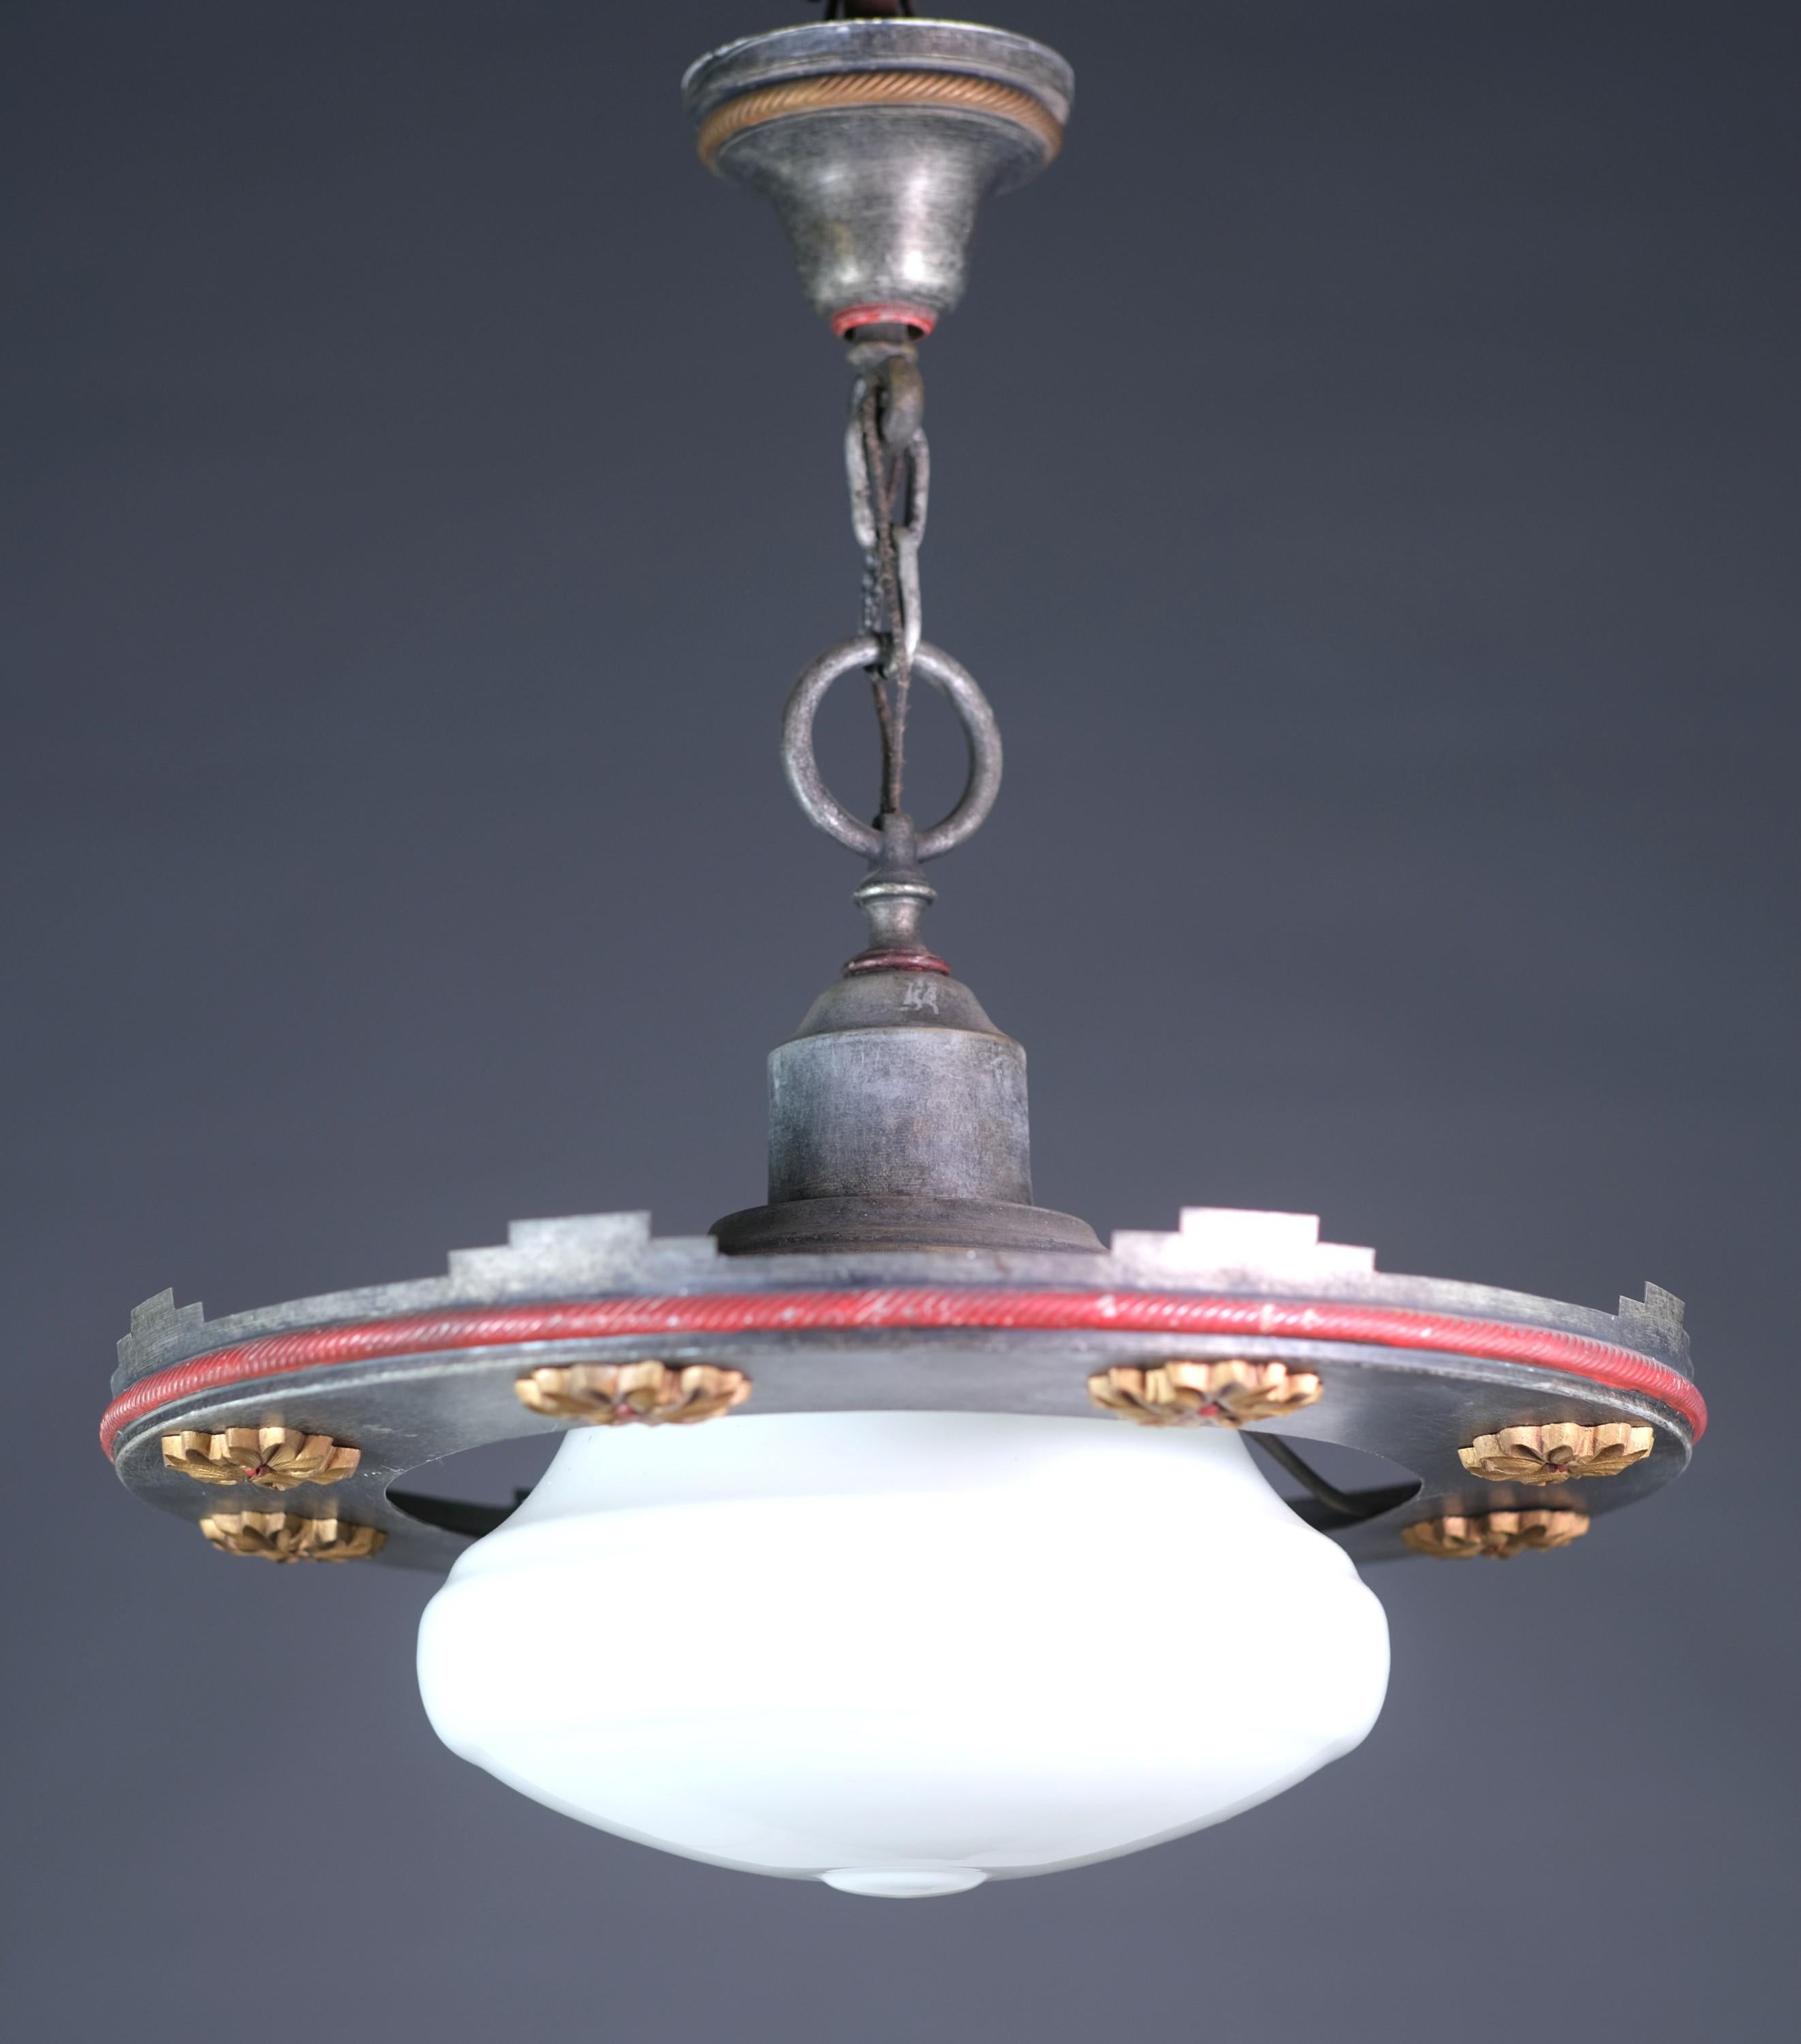 Unusual early 20th century short pendant light. Outside black ring features a series of gold painted florets. Red details. This can be seen at our 400 Gilligan St location in Scranton, PA.